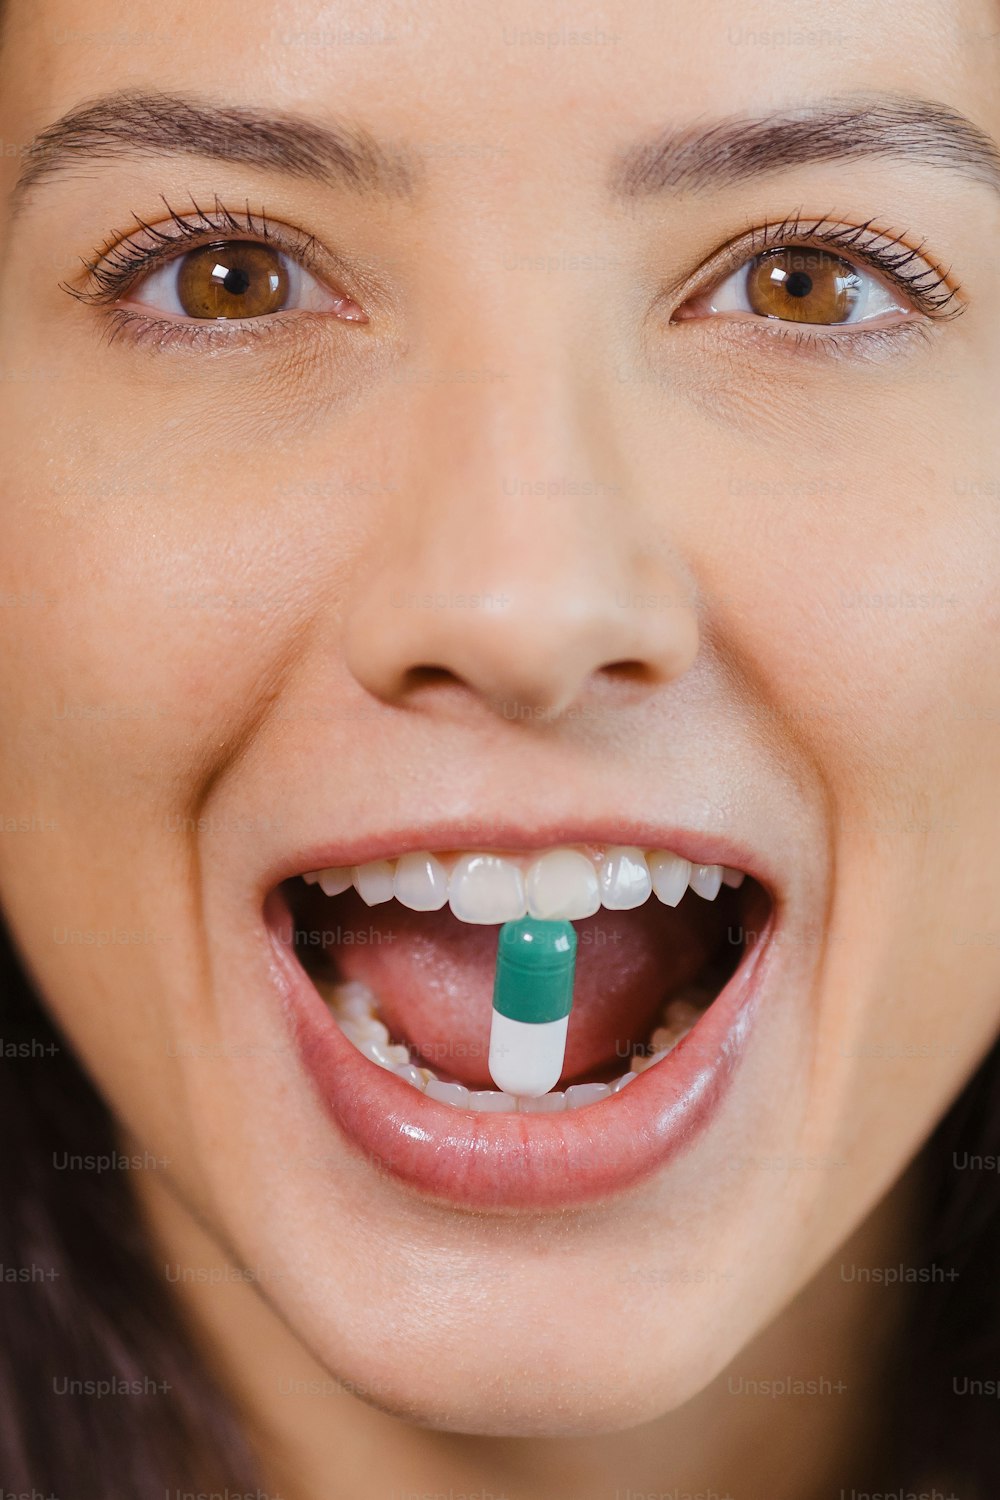 a woman with a green and white toothbrush in her mouth